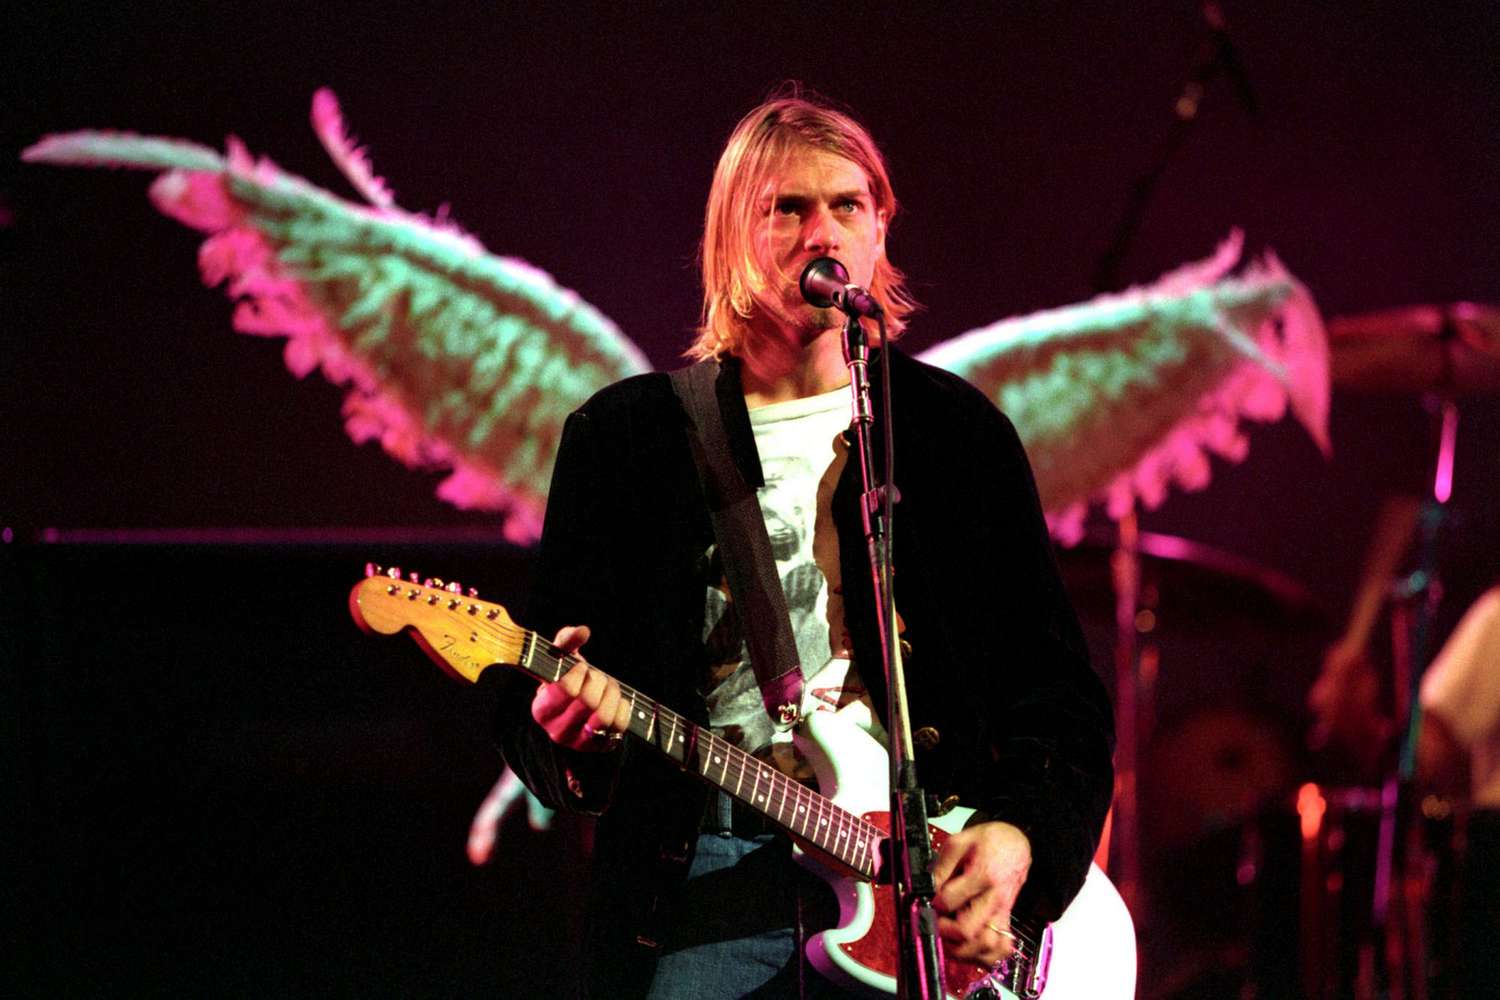 EW archives: Life at the top was far from Nirvana for Kurt Cobain | EW.com